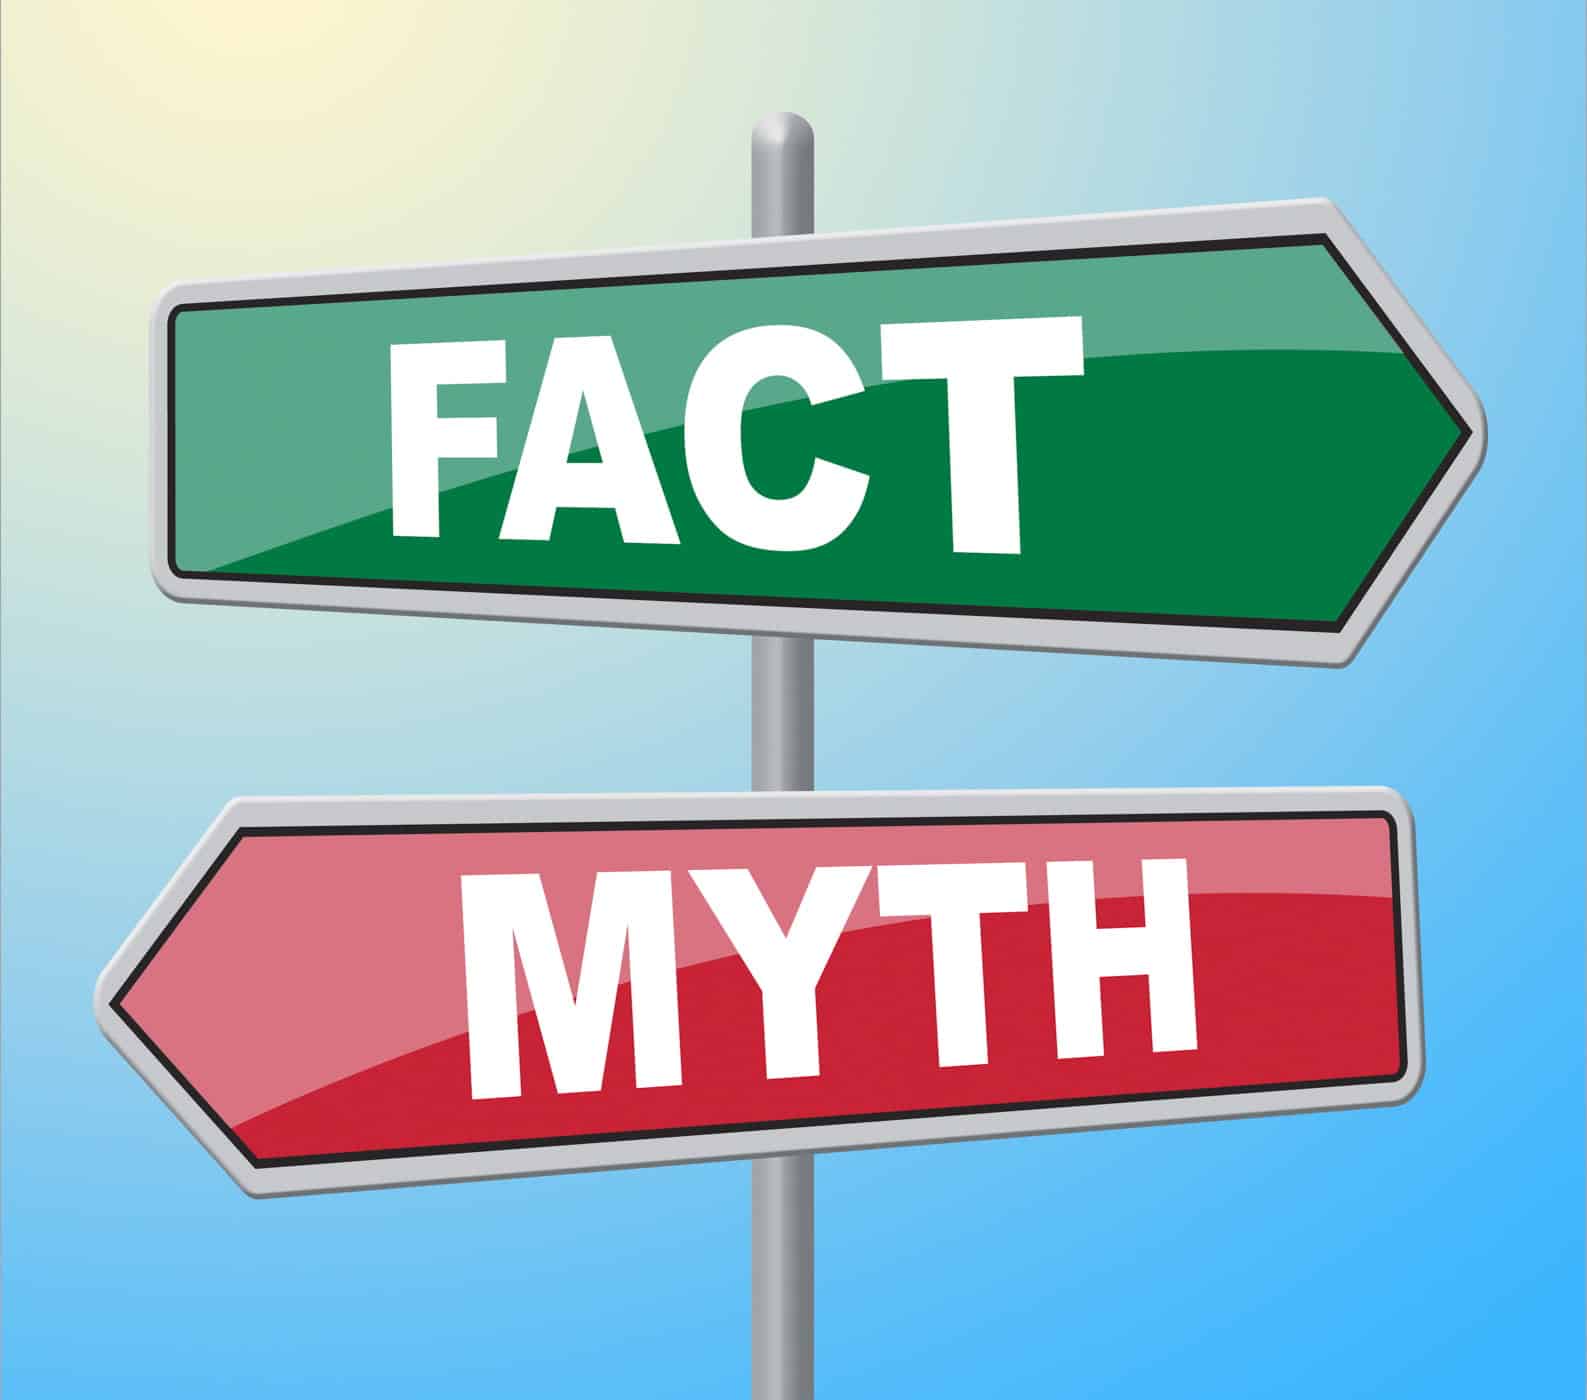 Do not mistake myths for facts